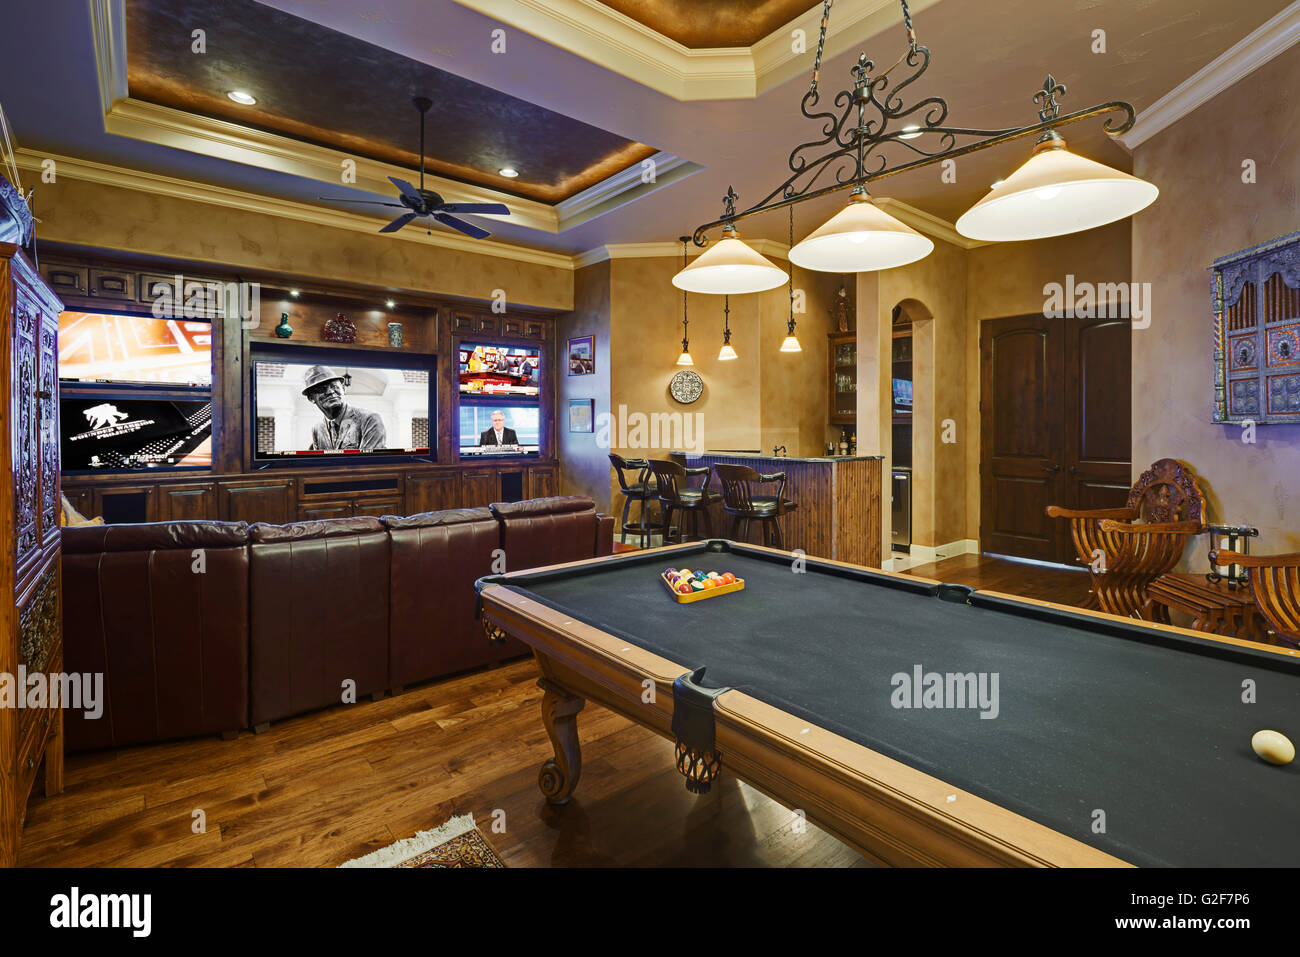 Game Room With Billiards Table and Flat Screen TV's Stock Photo